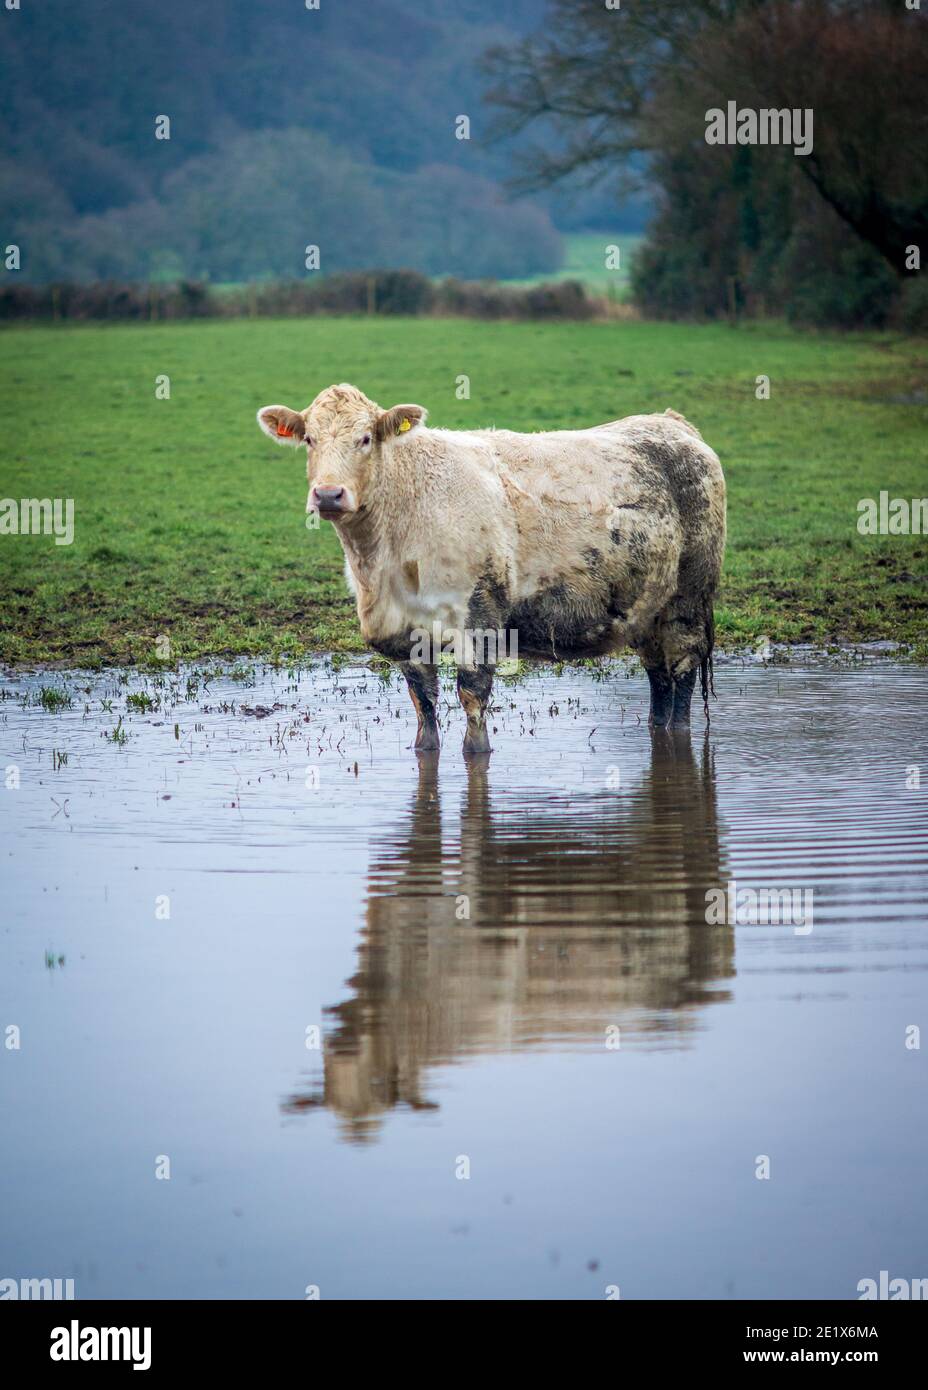 Cow standing in muddy water in winter Stock Photo